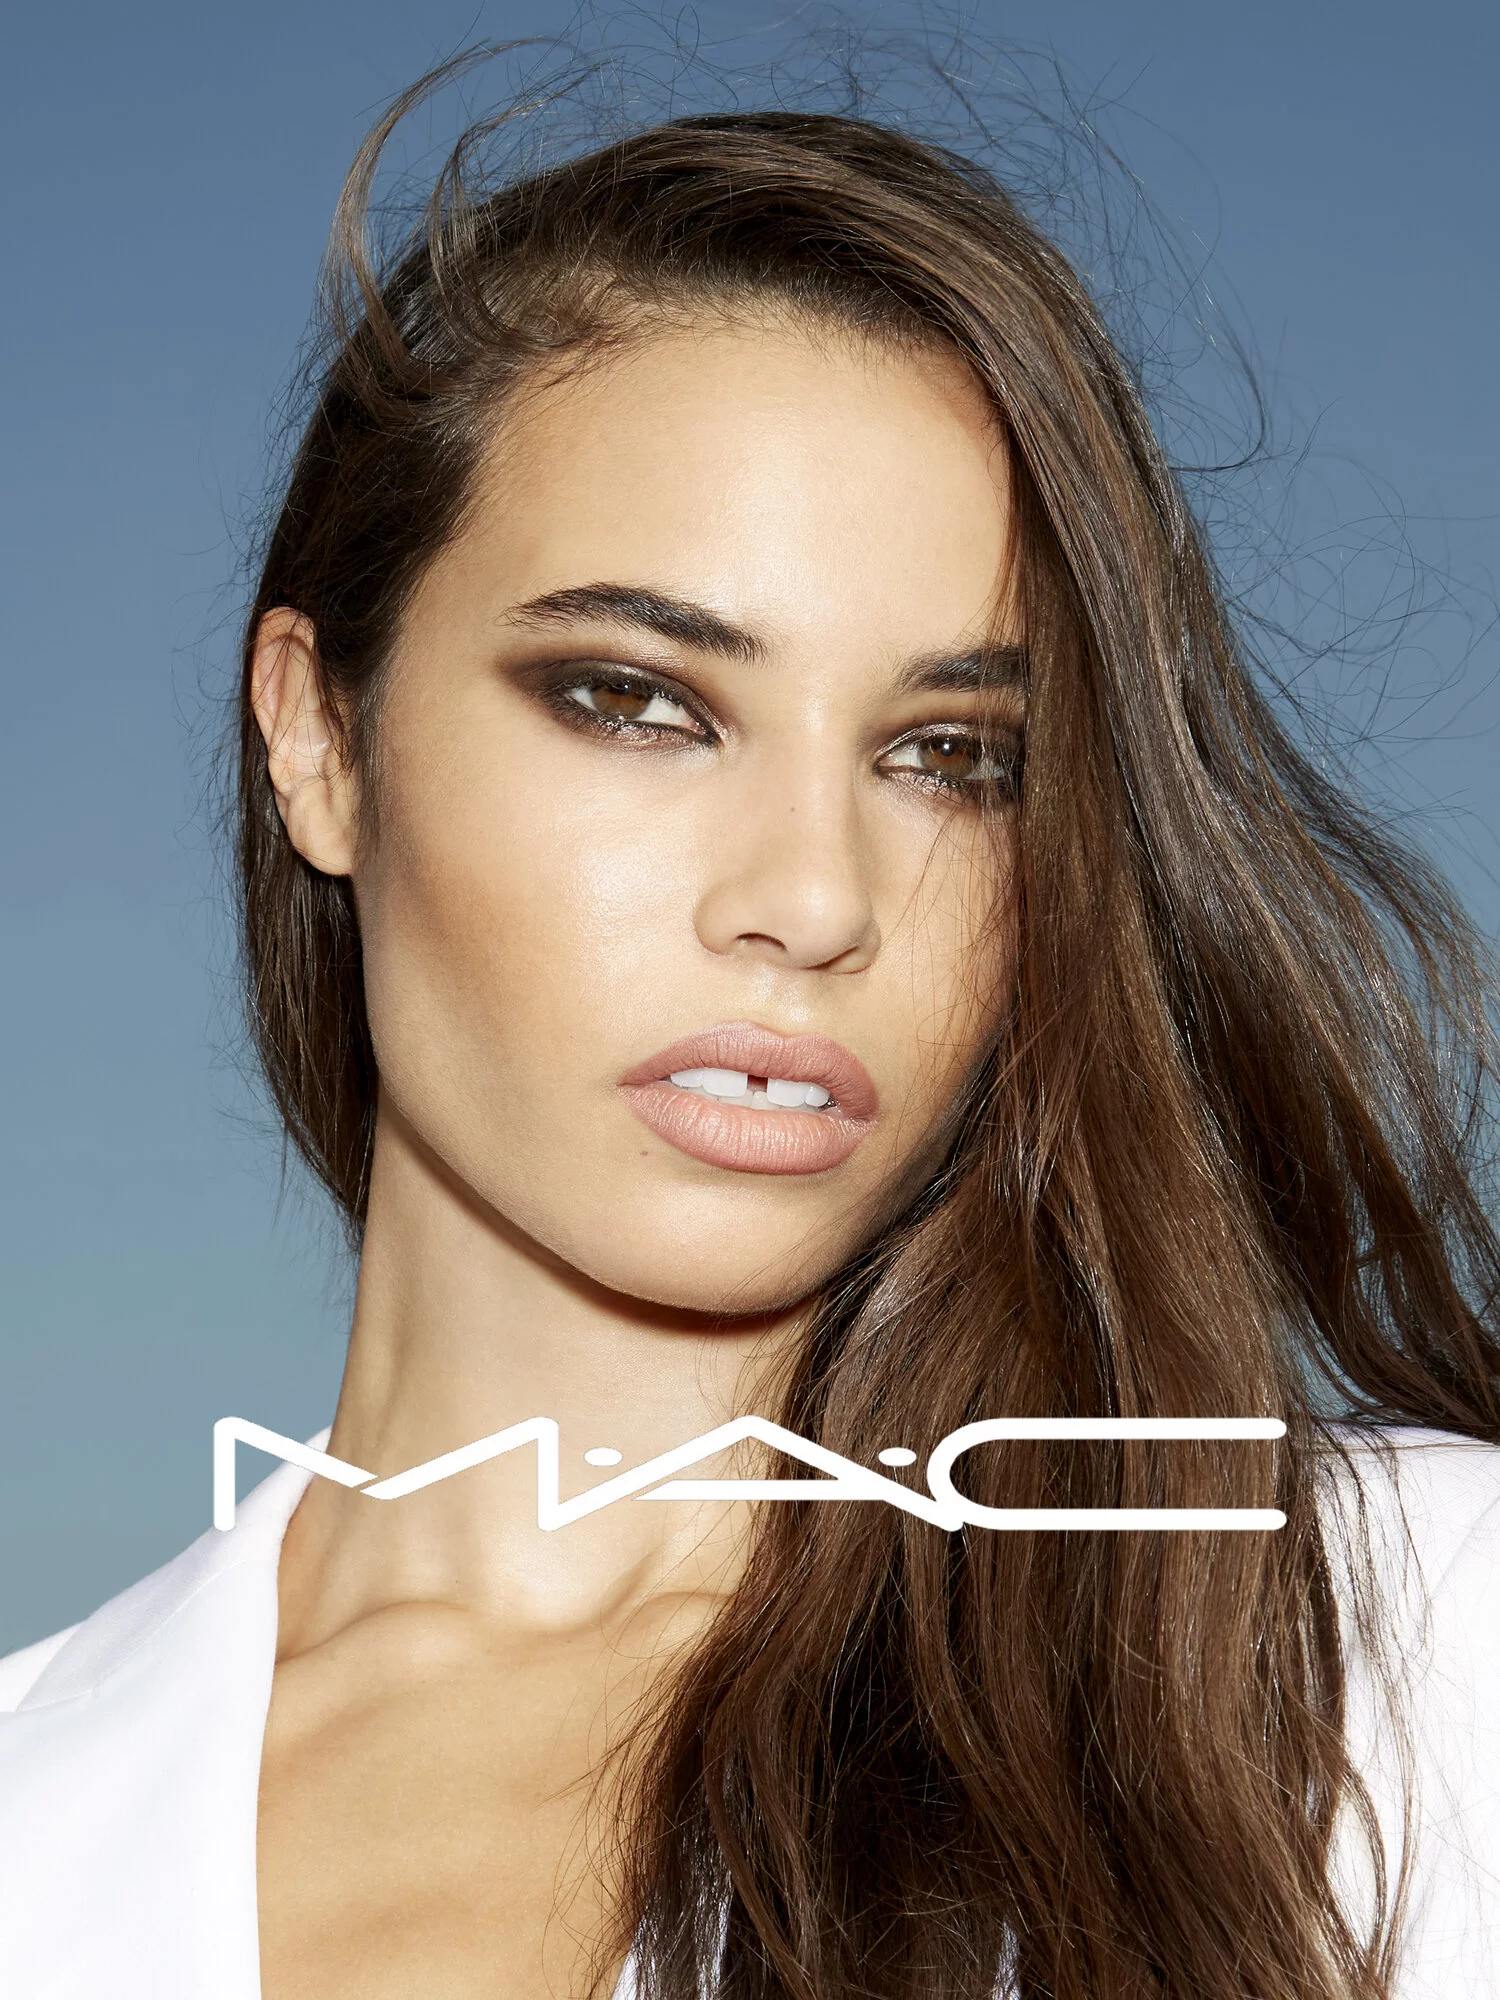 MAC Cosmetics 3 by Claire ROTHSTEIN